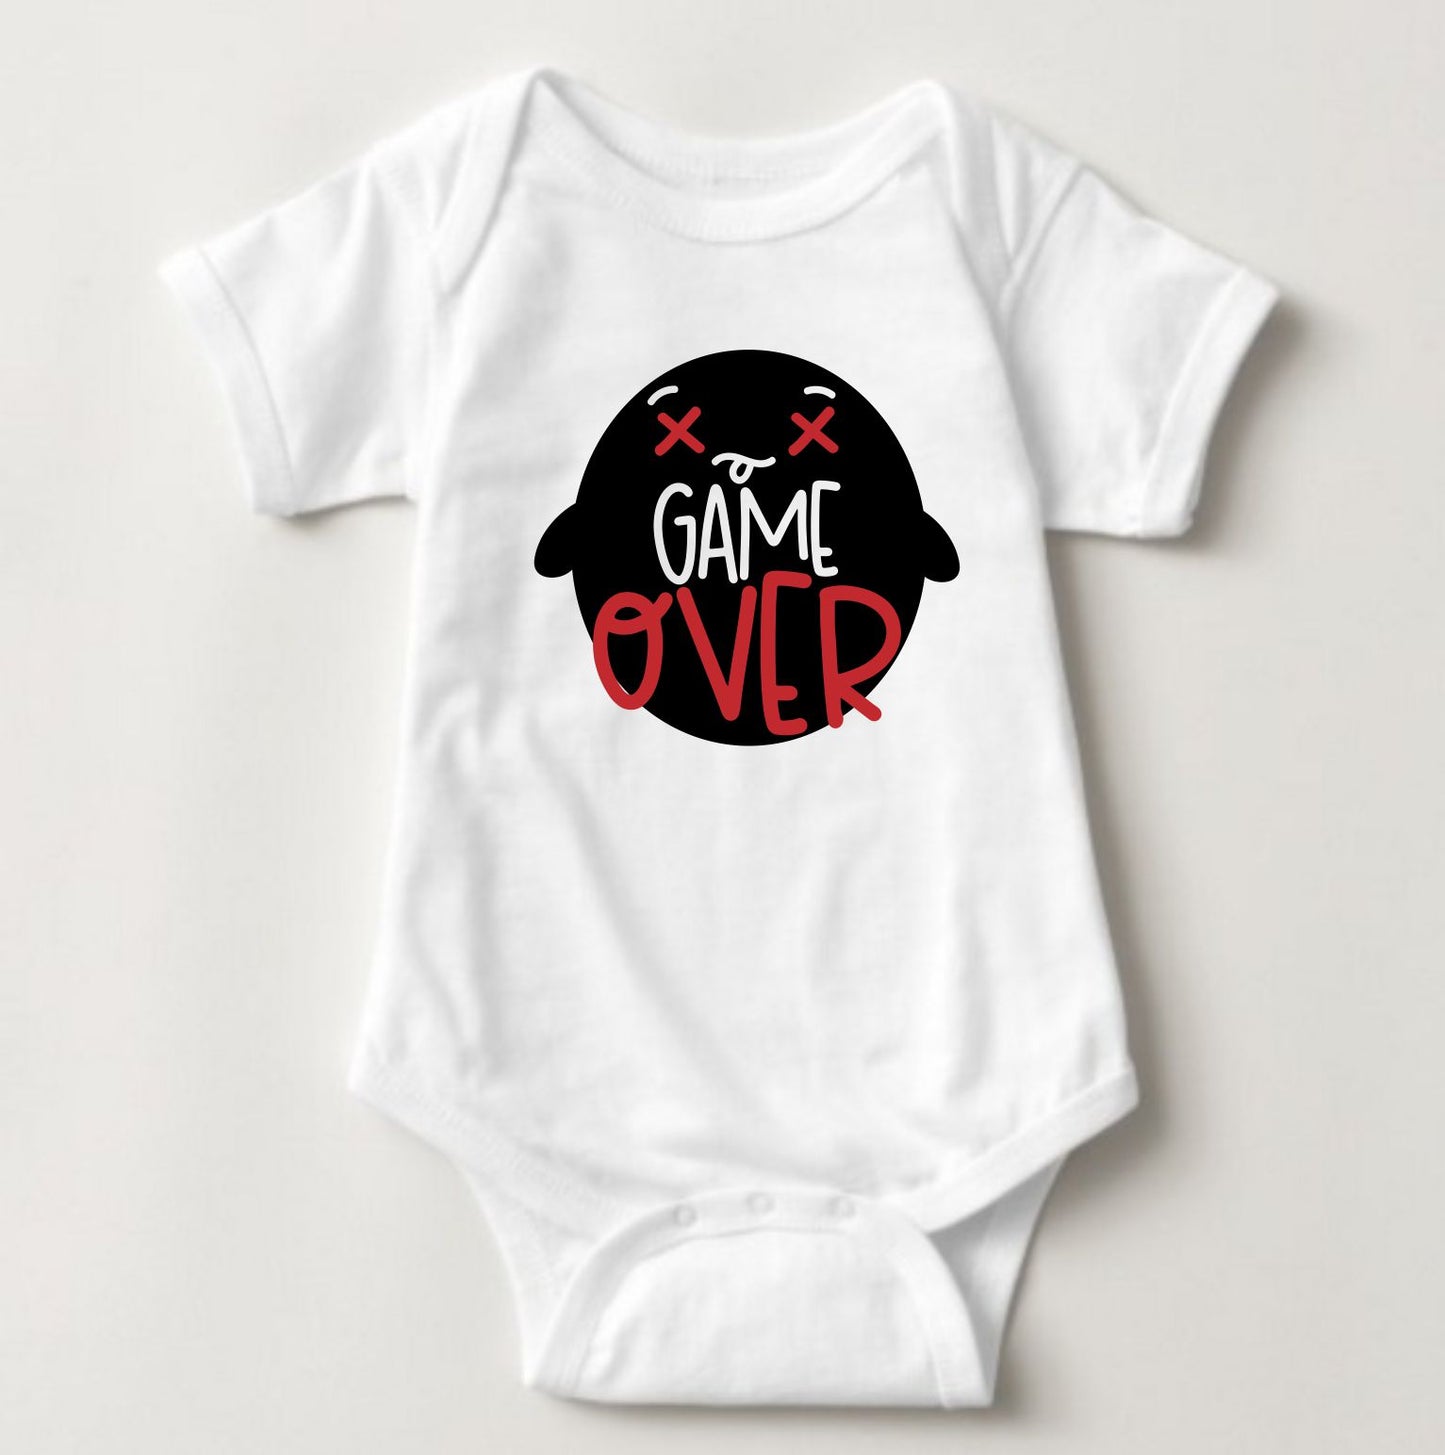 Baby Statement Onesies-Game Over